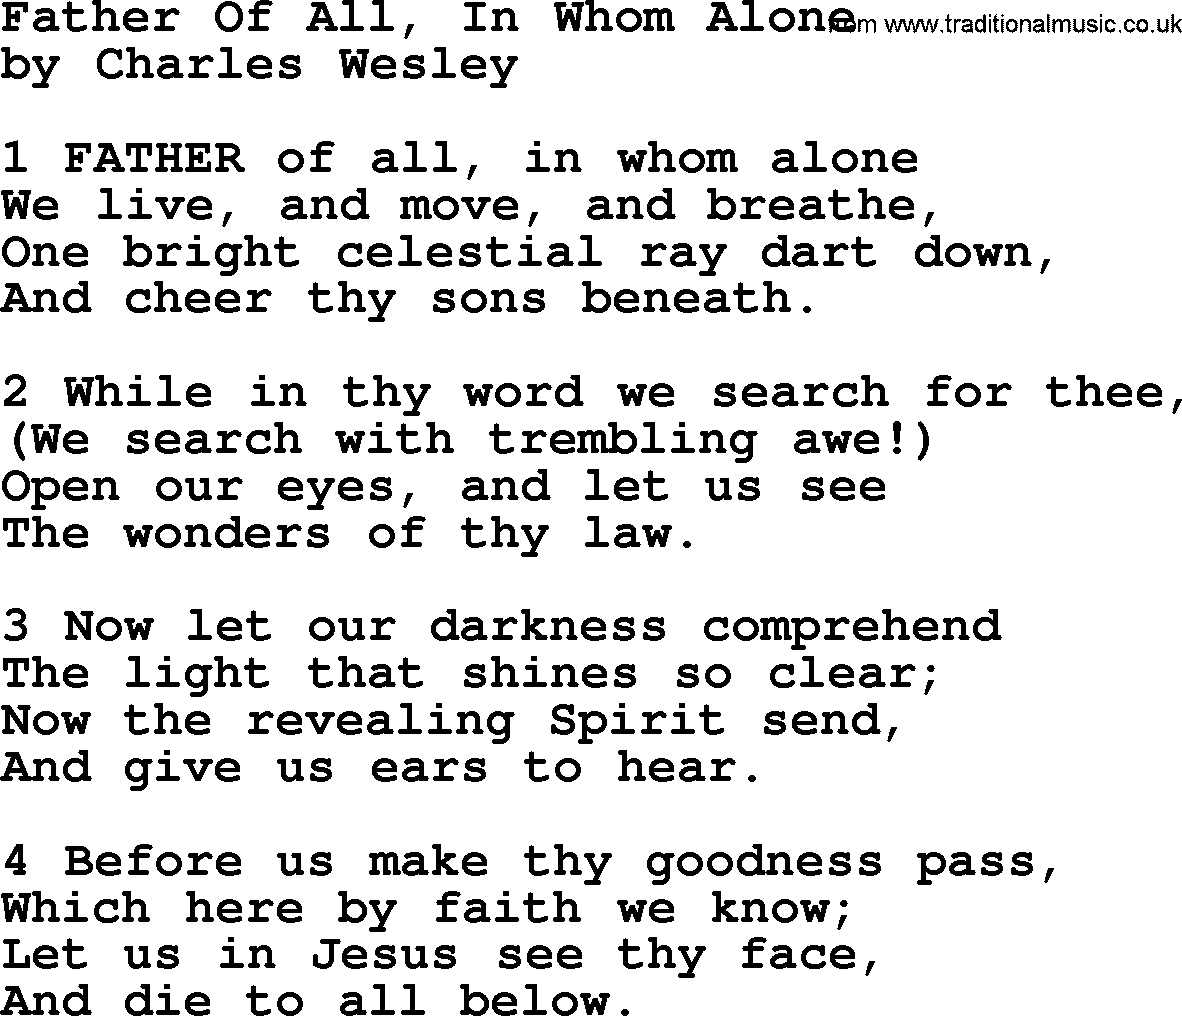 Charles Wesley hymn: Father Of All, In Whom Alone, lyrics